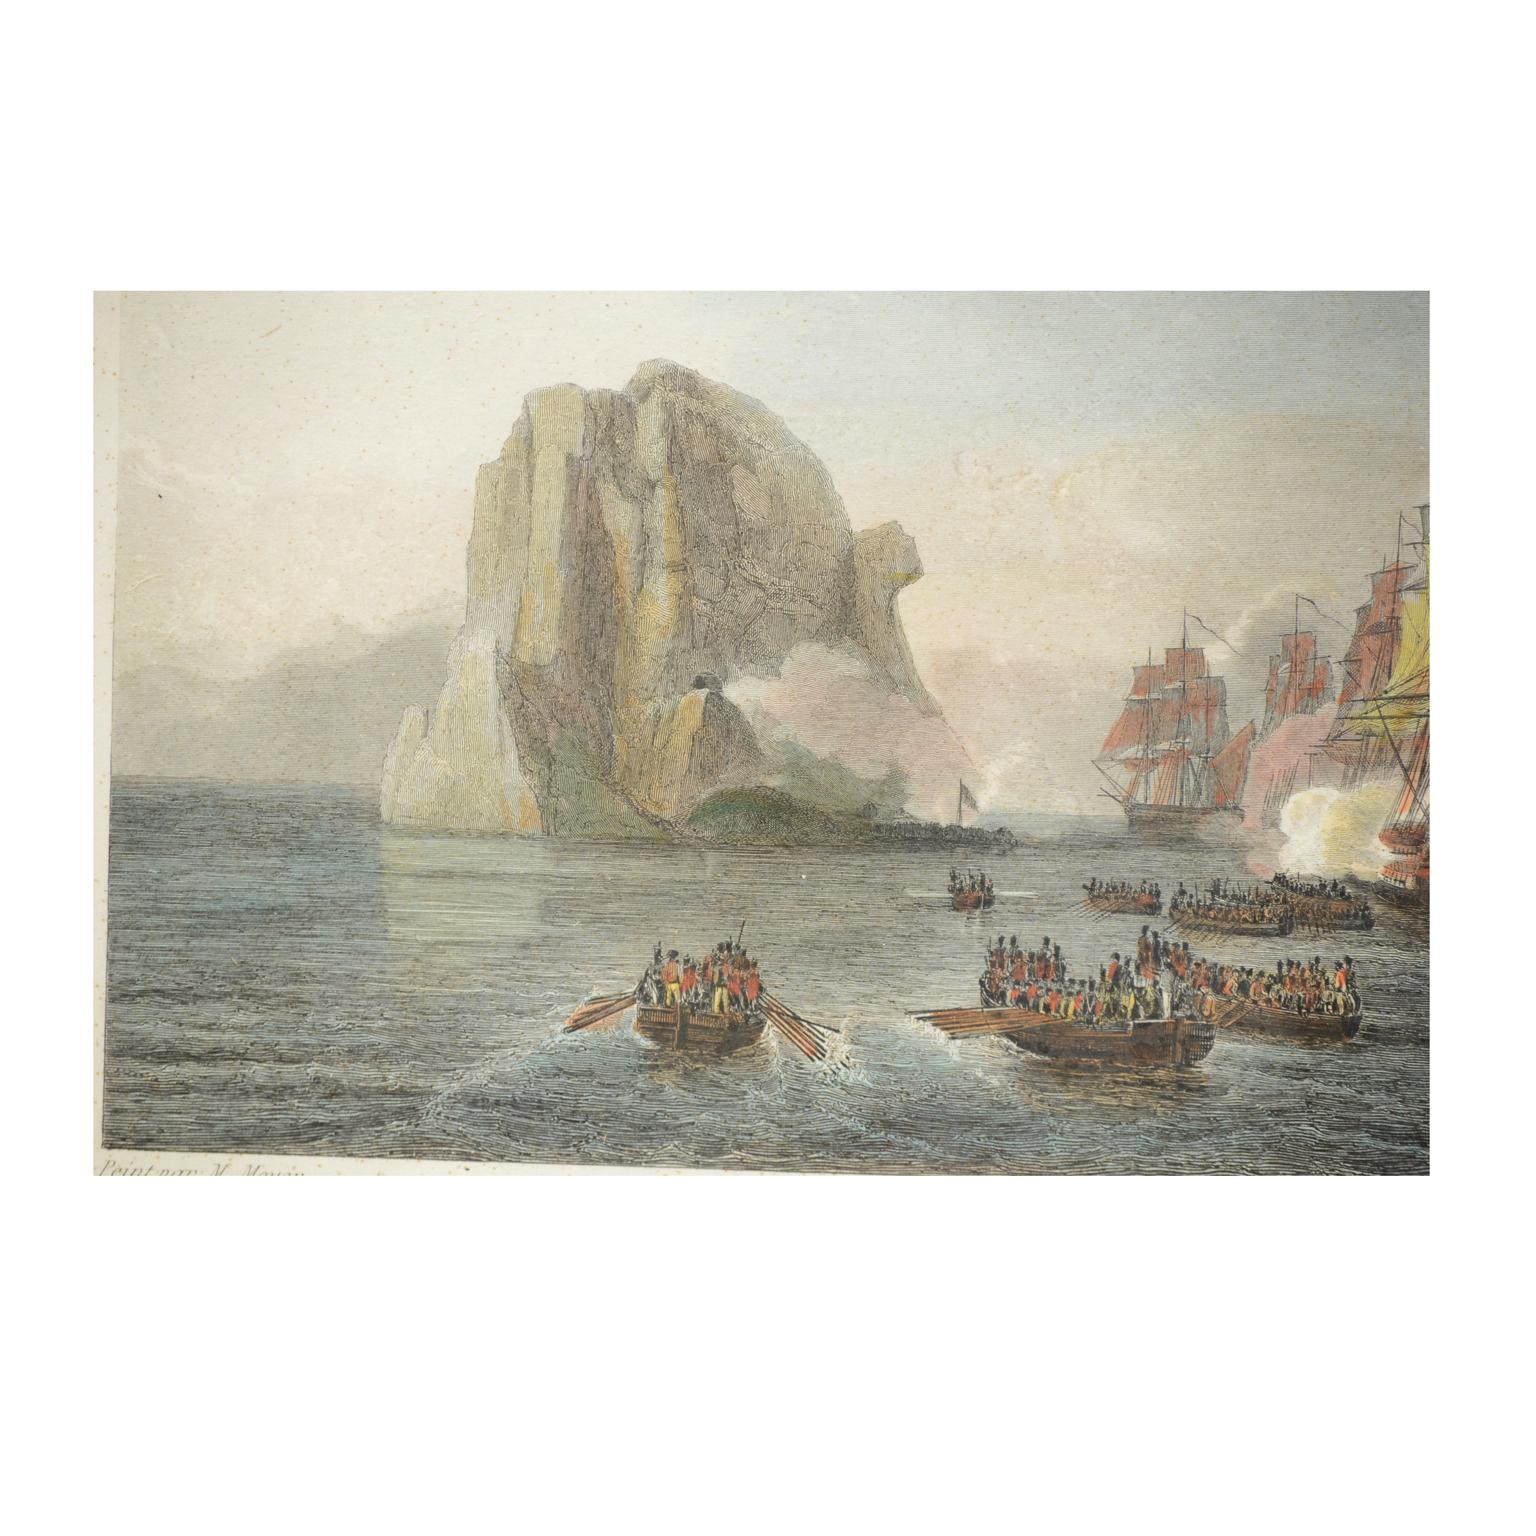 Paper Antique Lithographic Print of the Diamond Rock Battle Early 1900s, Oakwood Frame For Sale